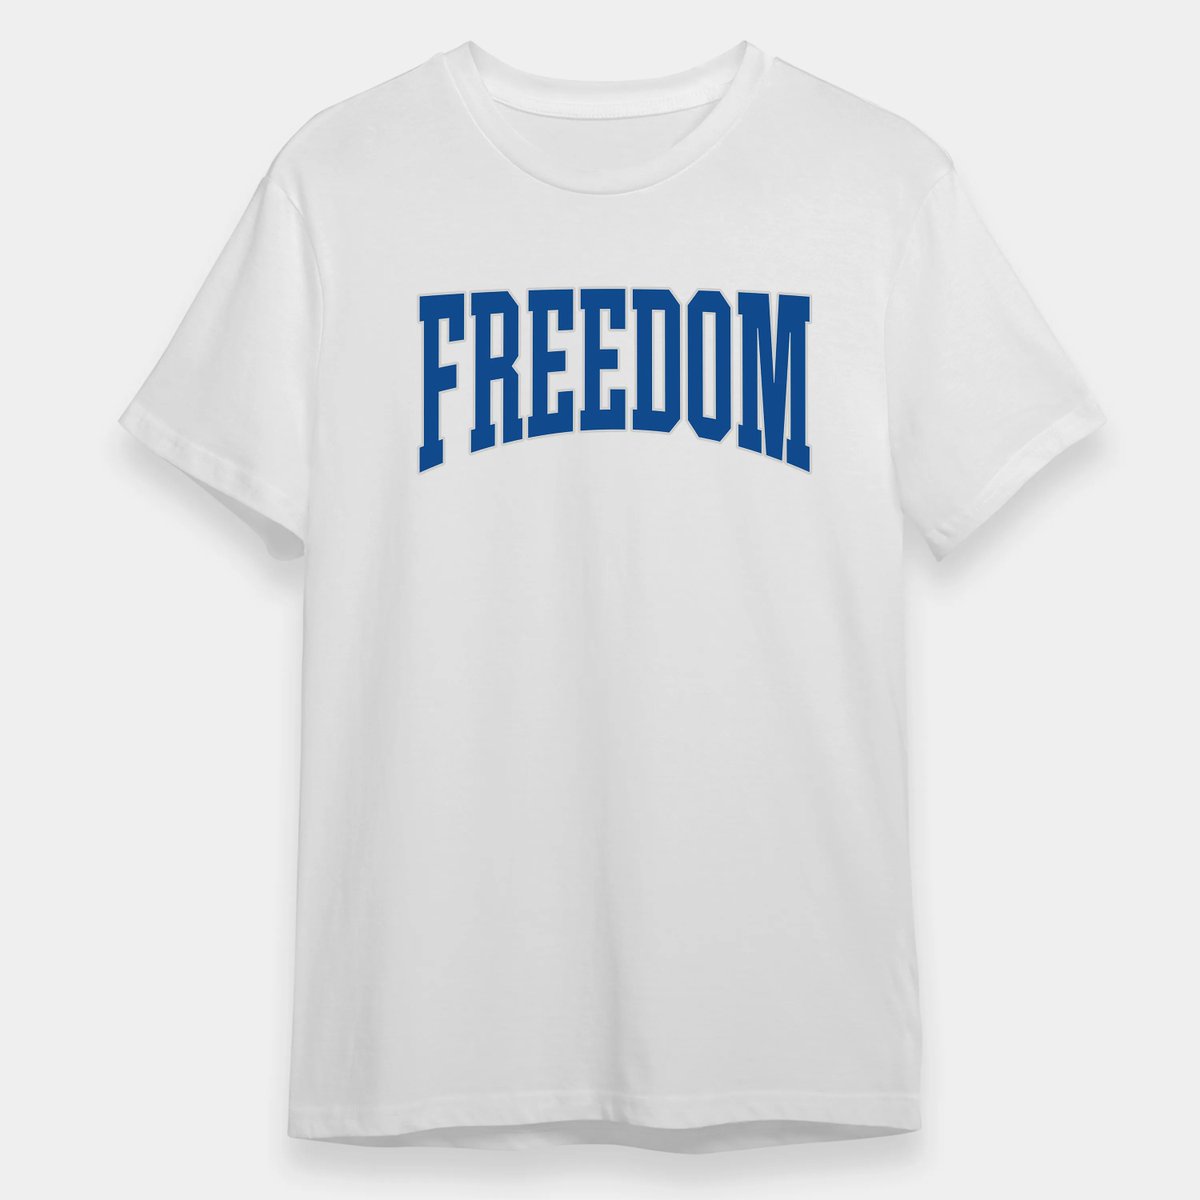 True freedom is found in Christ alone. 'For freedom Christ has set us free; stand firm therefore, and do not submit again to a yoke of slavery.' - Galatians 5:1 🙌✝️ #FreedomInChrist #SetFreeByGrace #ChristianLiving 

#christianstyle #christianclothing #faithbasedfashion